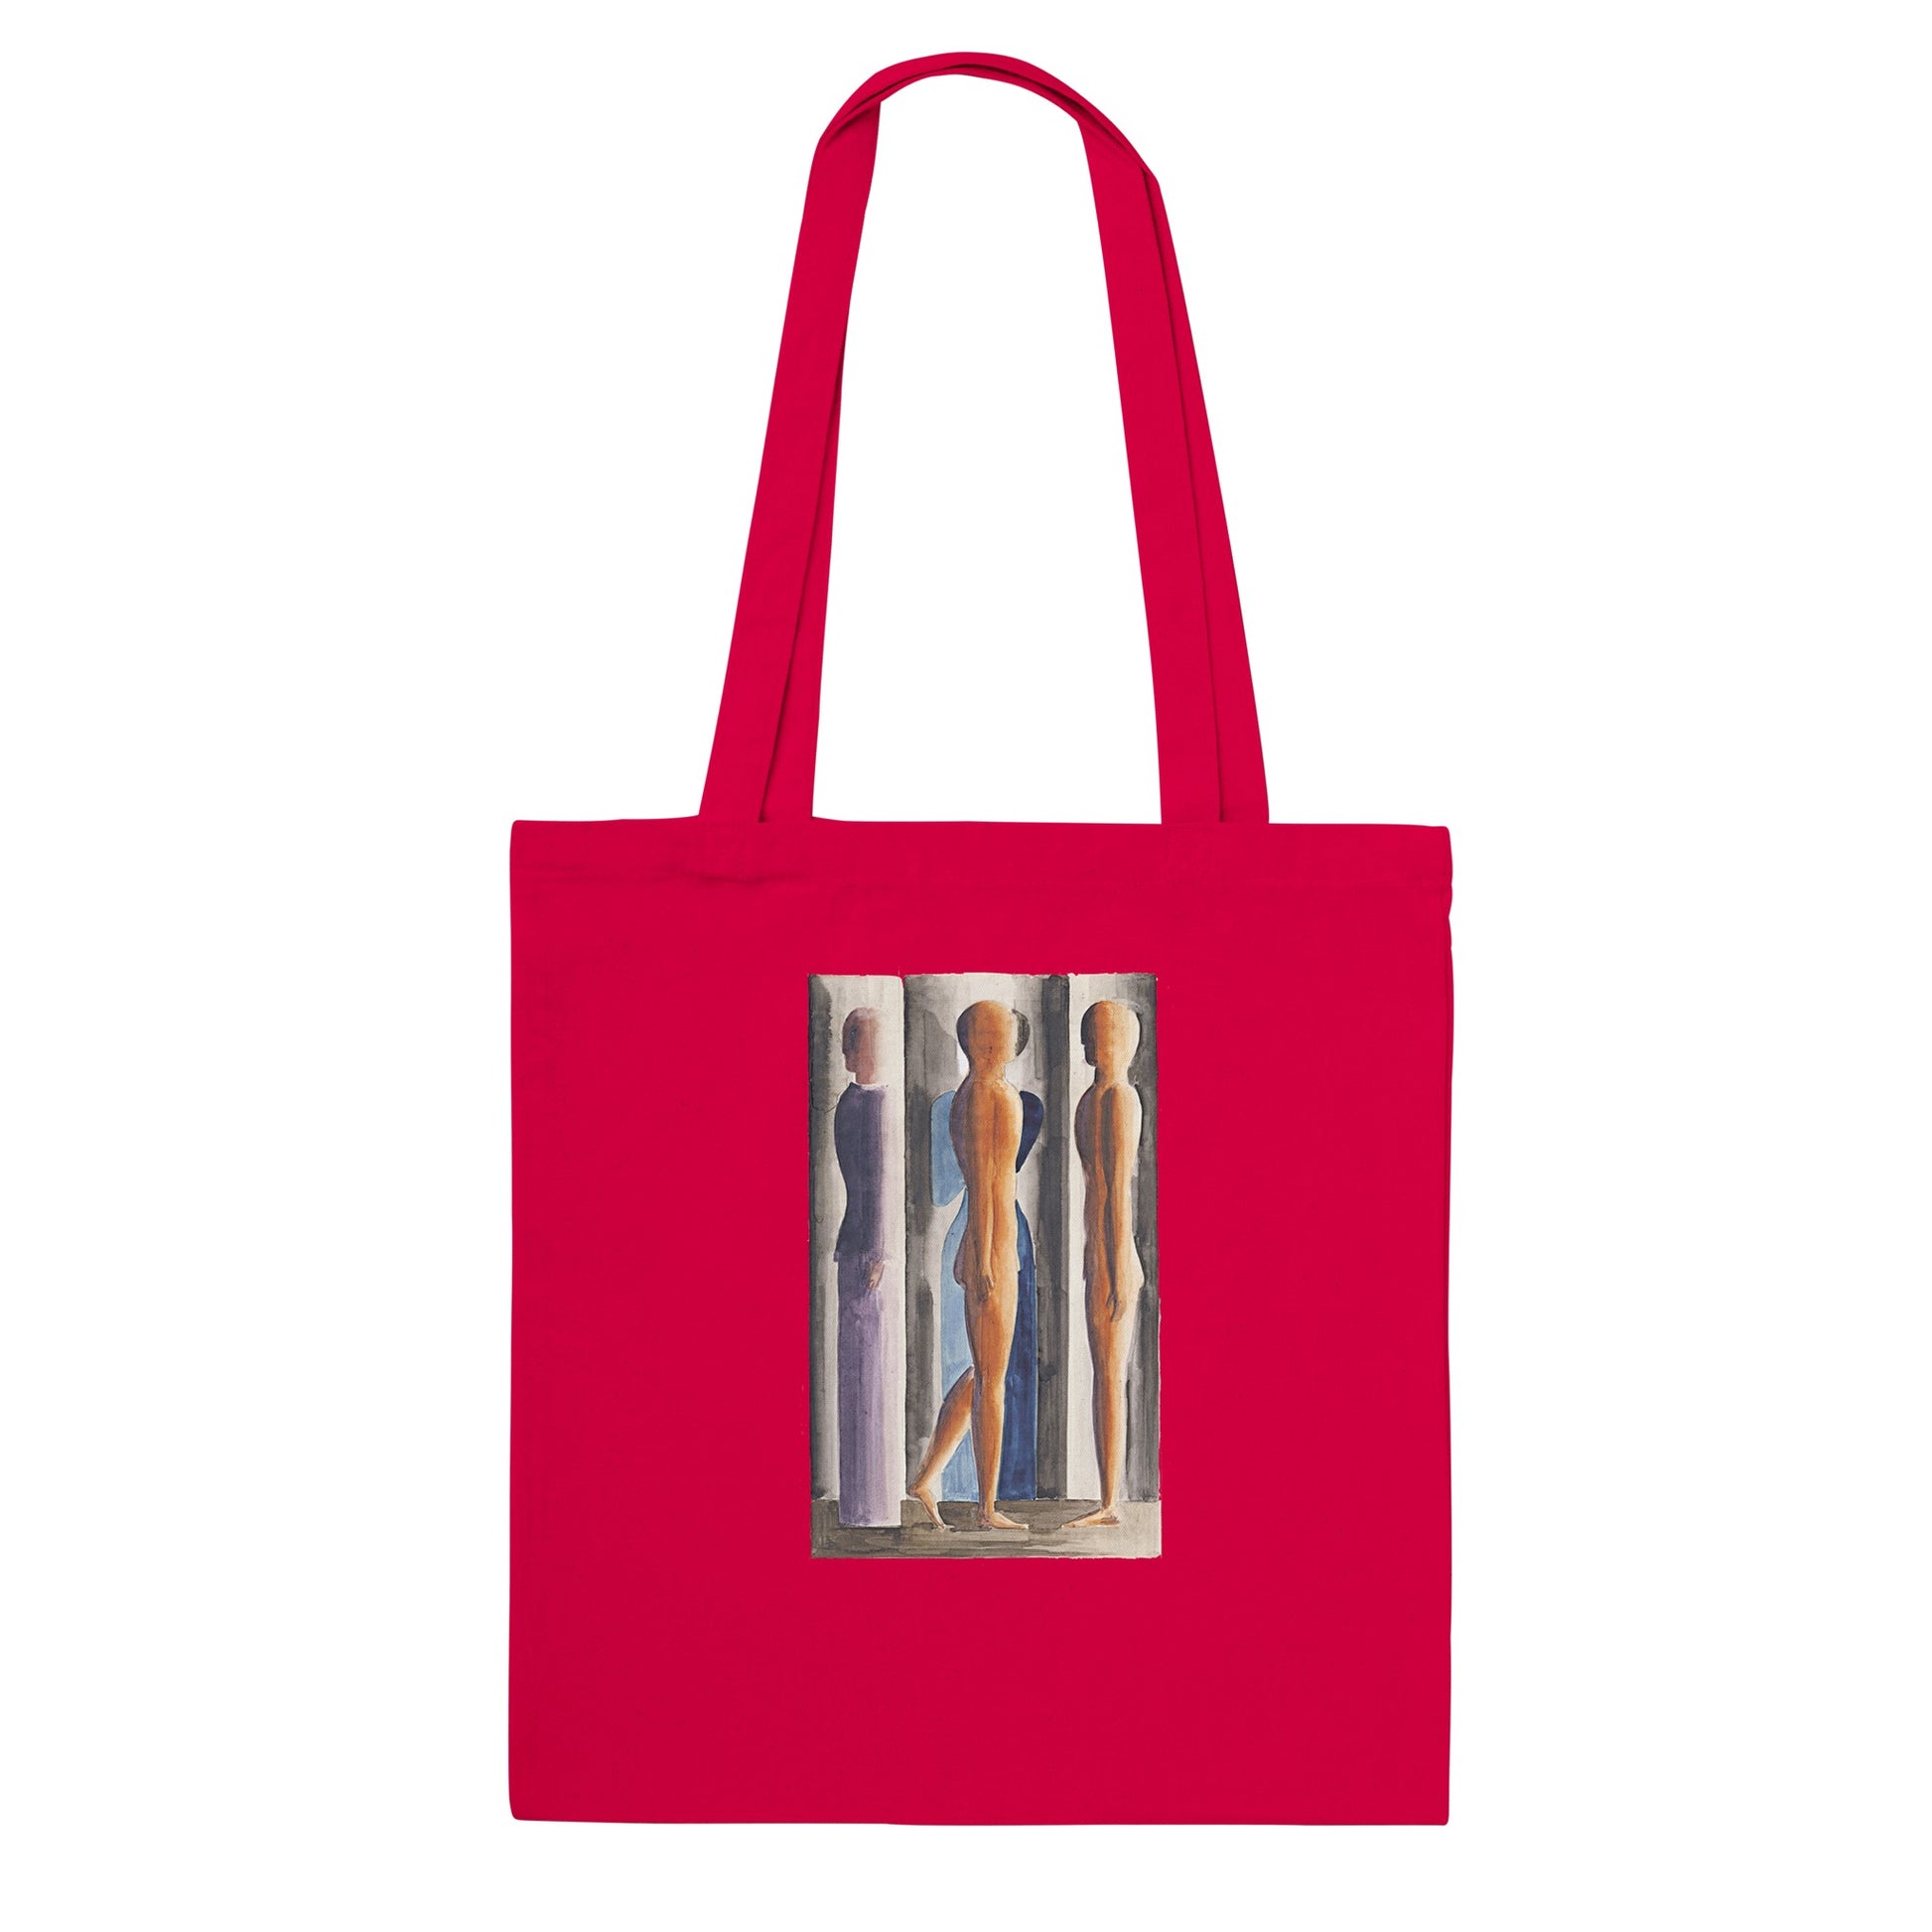 OSKAR SCHLEMMER - FORMATION. THREE DIVISIONS - CLASSIC TOTE BAG